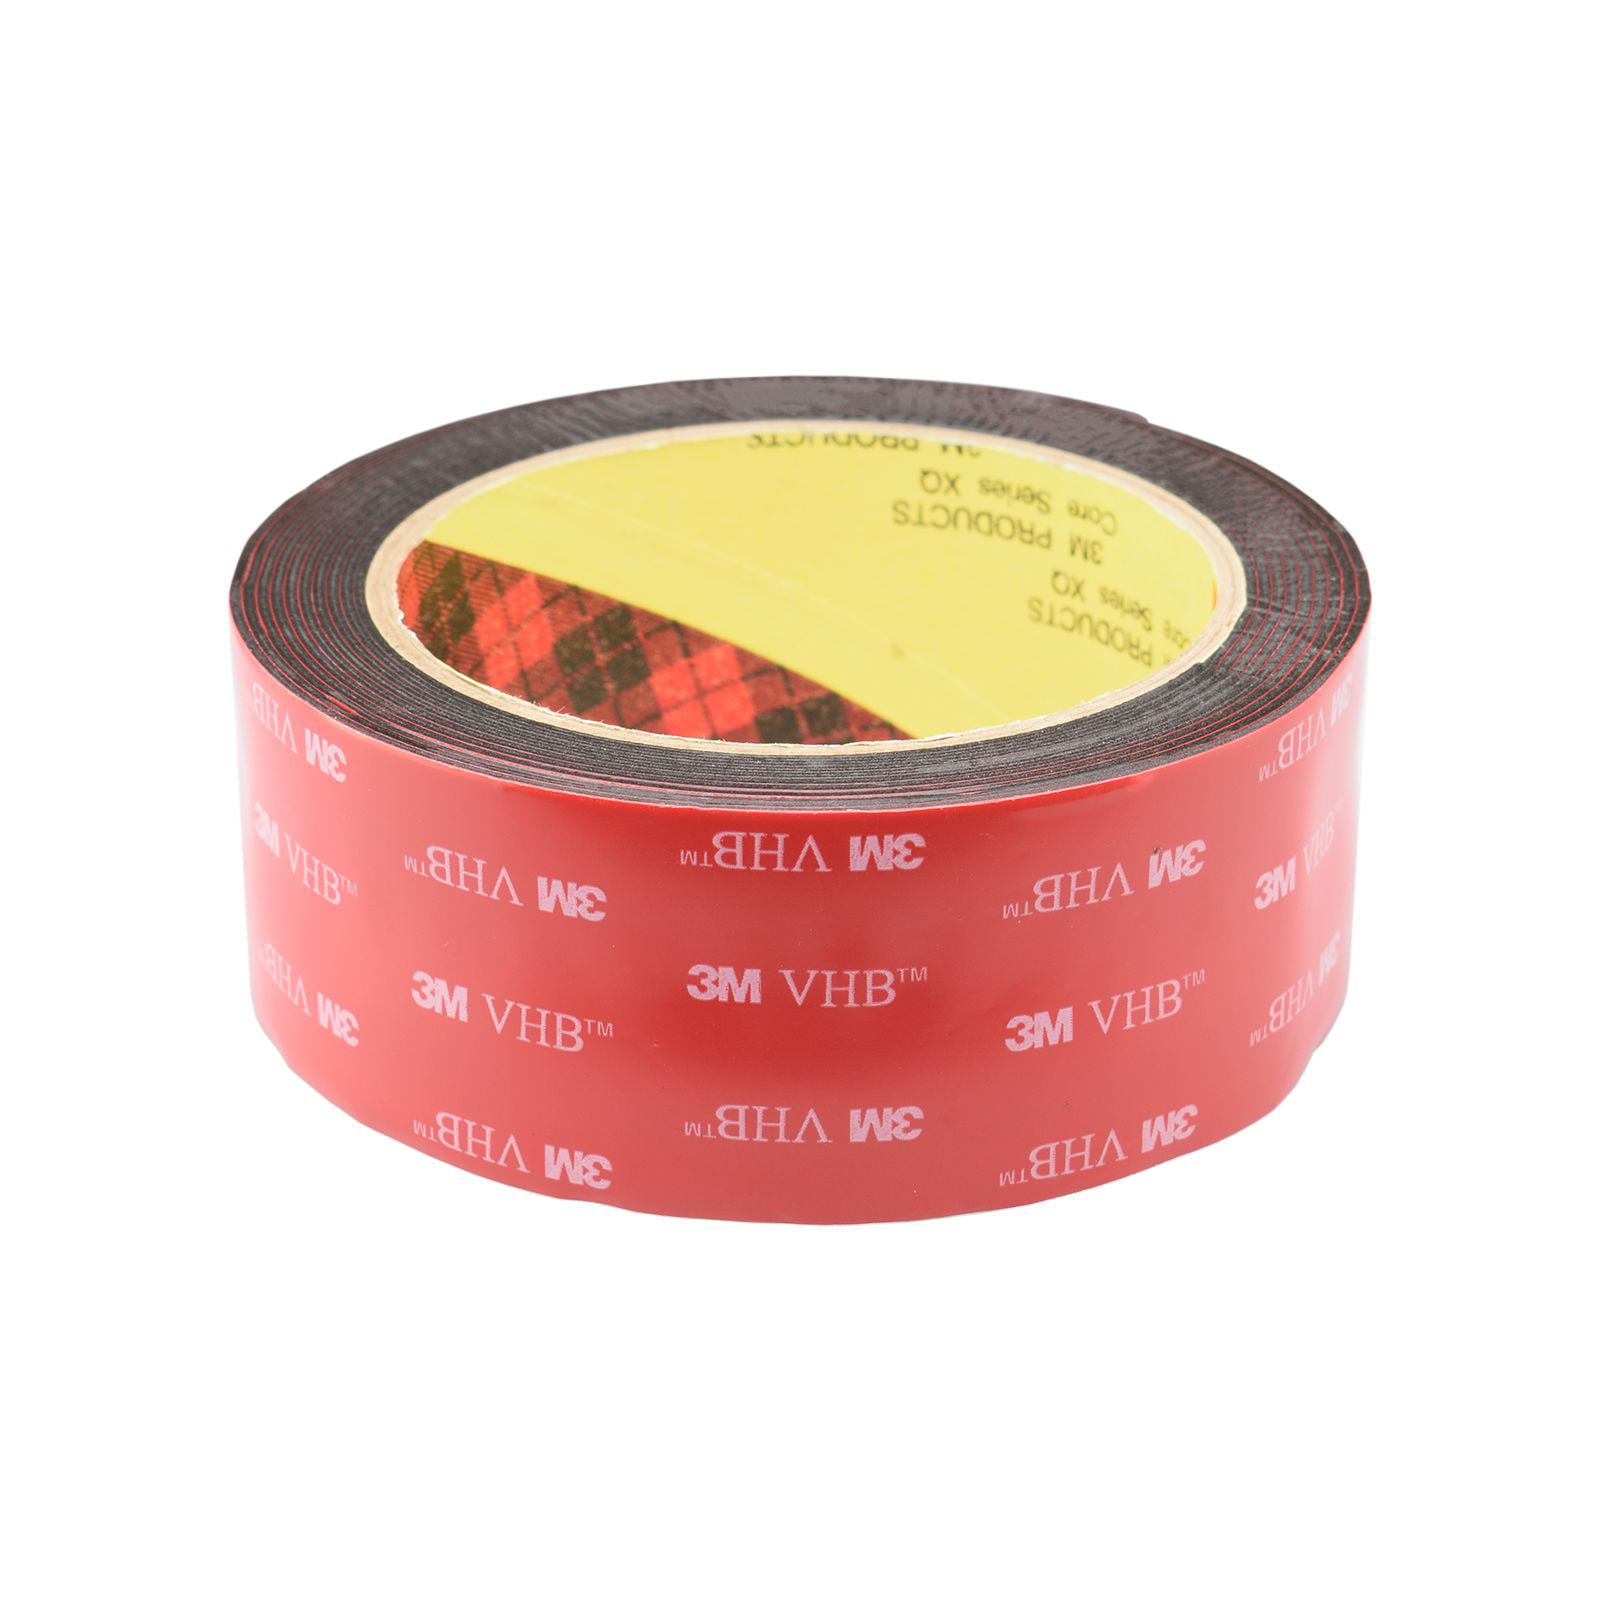 XFasten Double Sided Woodworking Tape w/ Yellow Backing 2.5 x 30 yd 